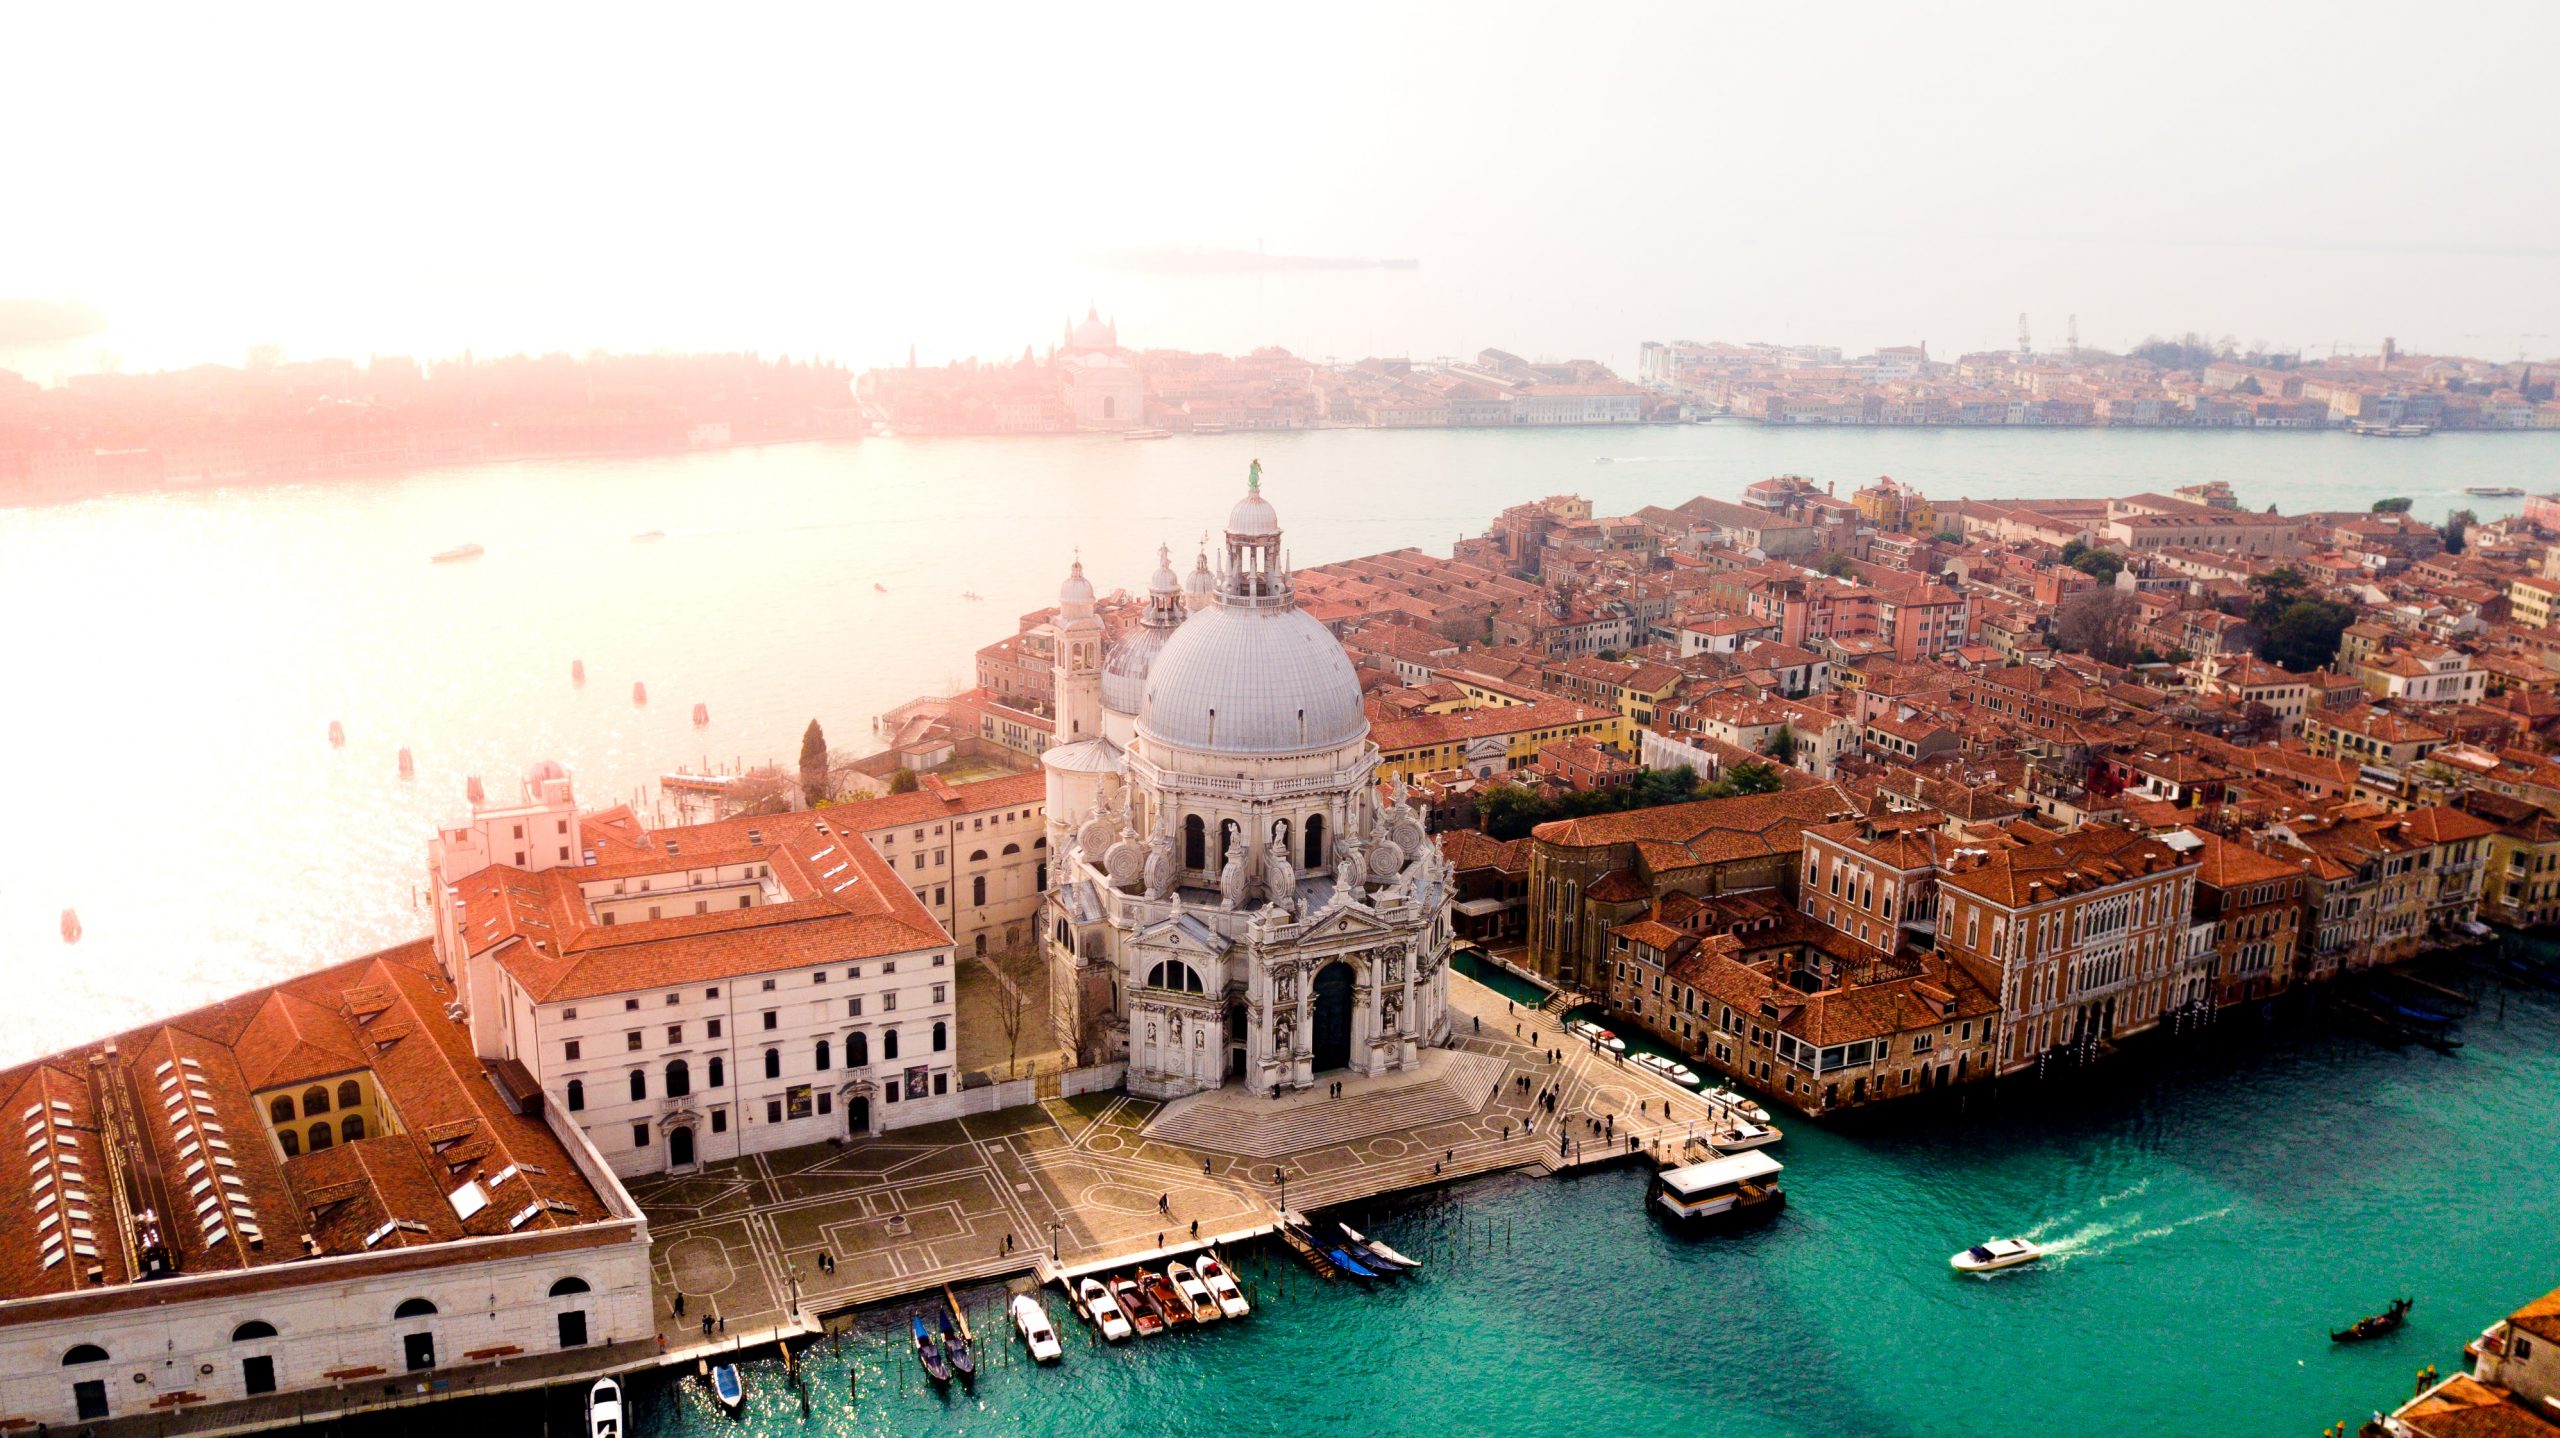 The Top 10 Most Frequently Asked Questions about Venice + The Answers